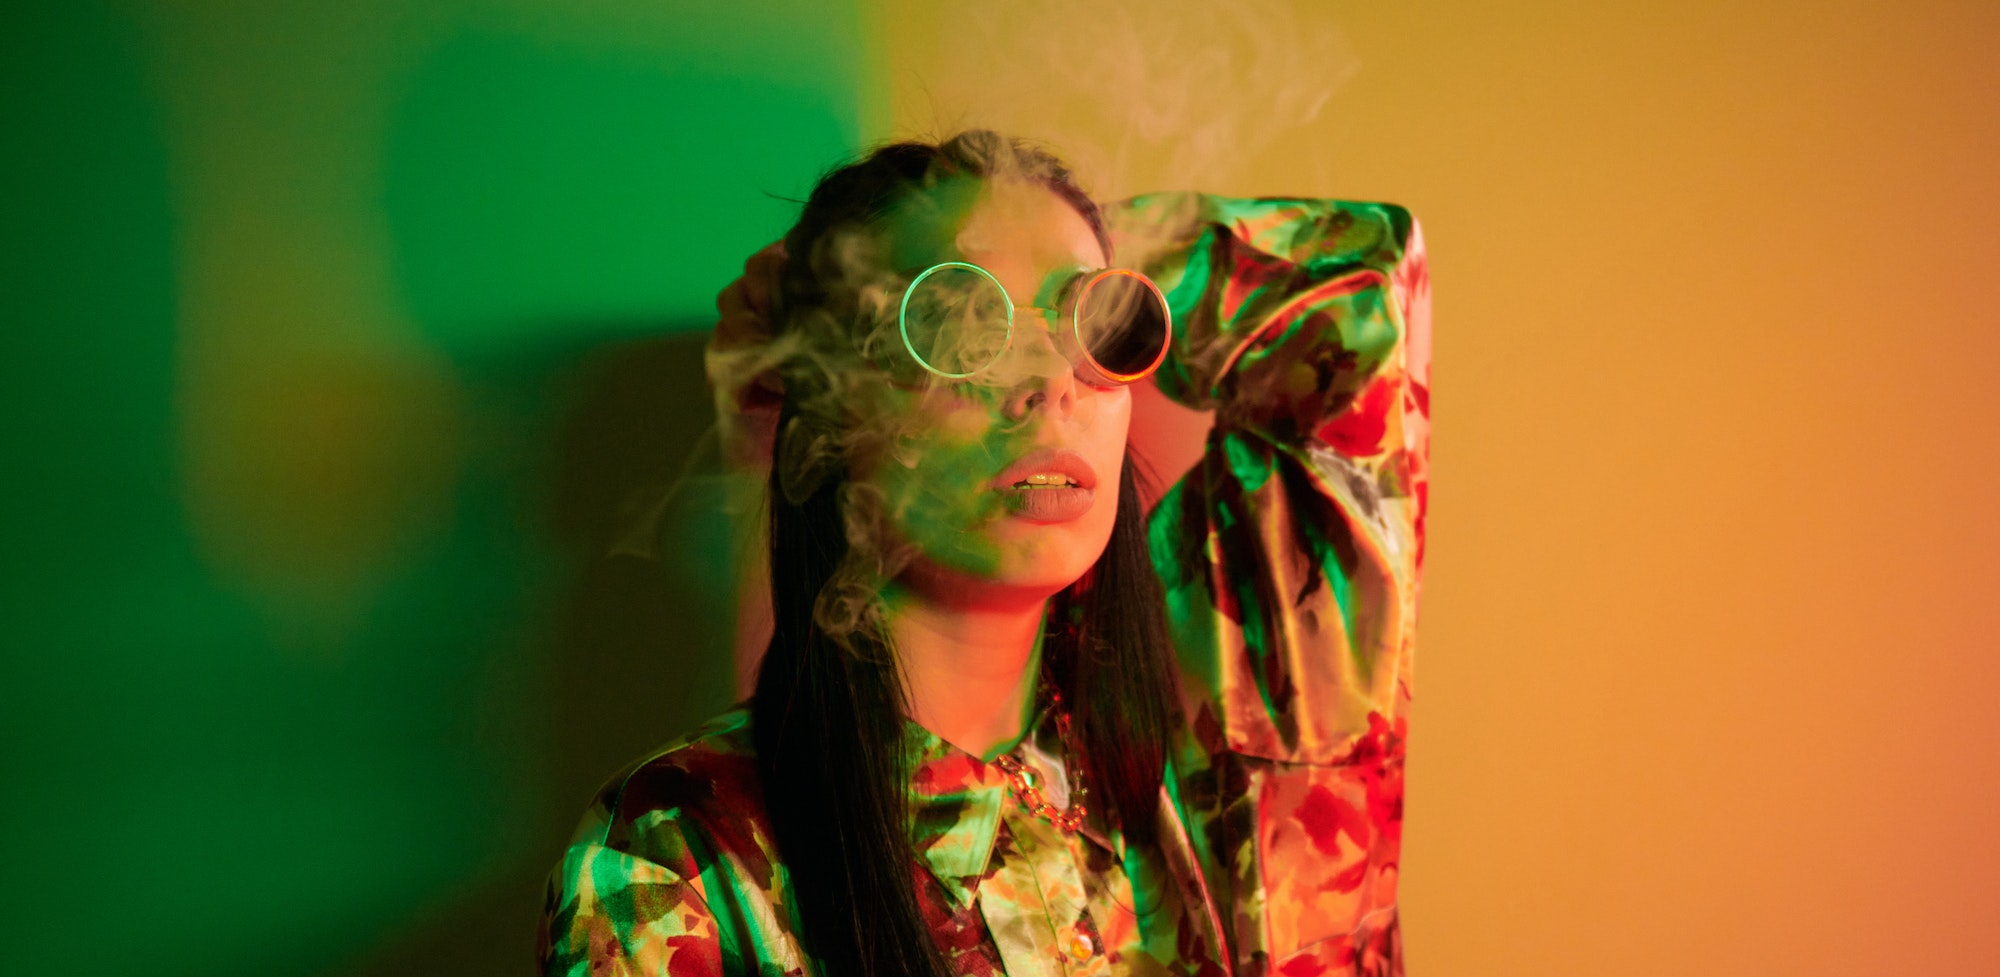 Smoking, activity. Fashionable young woman standing in the studio with neon light